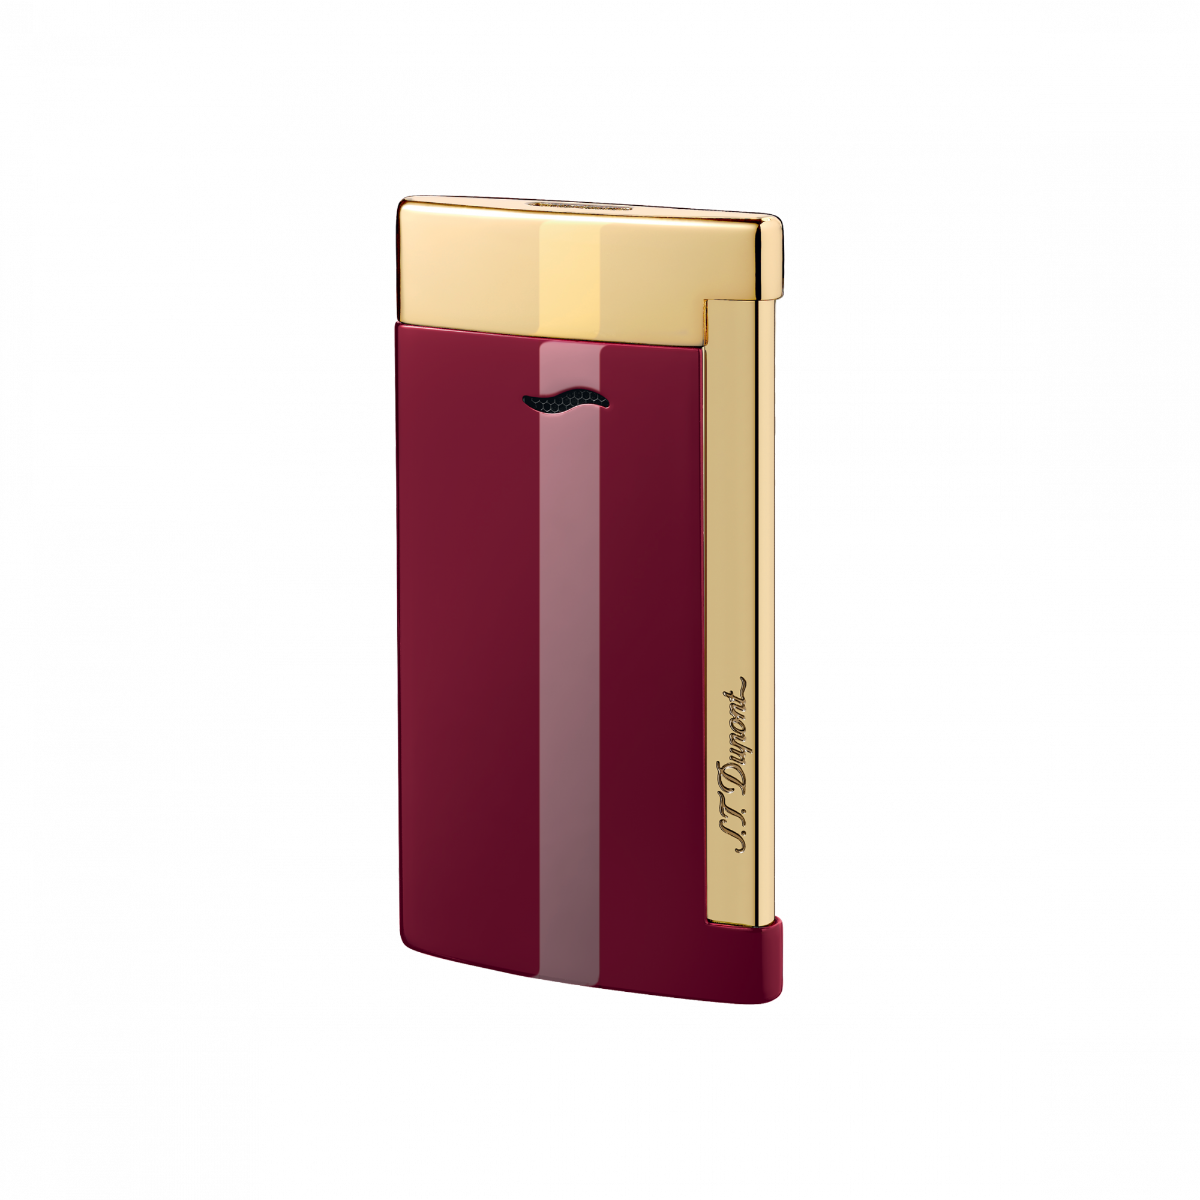 A burgundy S.T. Dupont Slim 7 Red & Gold Lighter with gold trim from S.T. Dupont's Slim 7 collection.